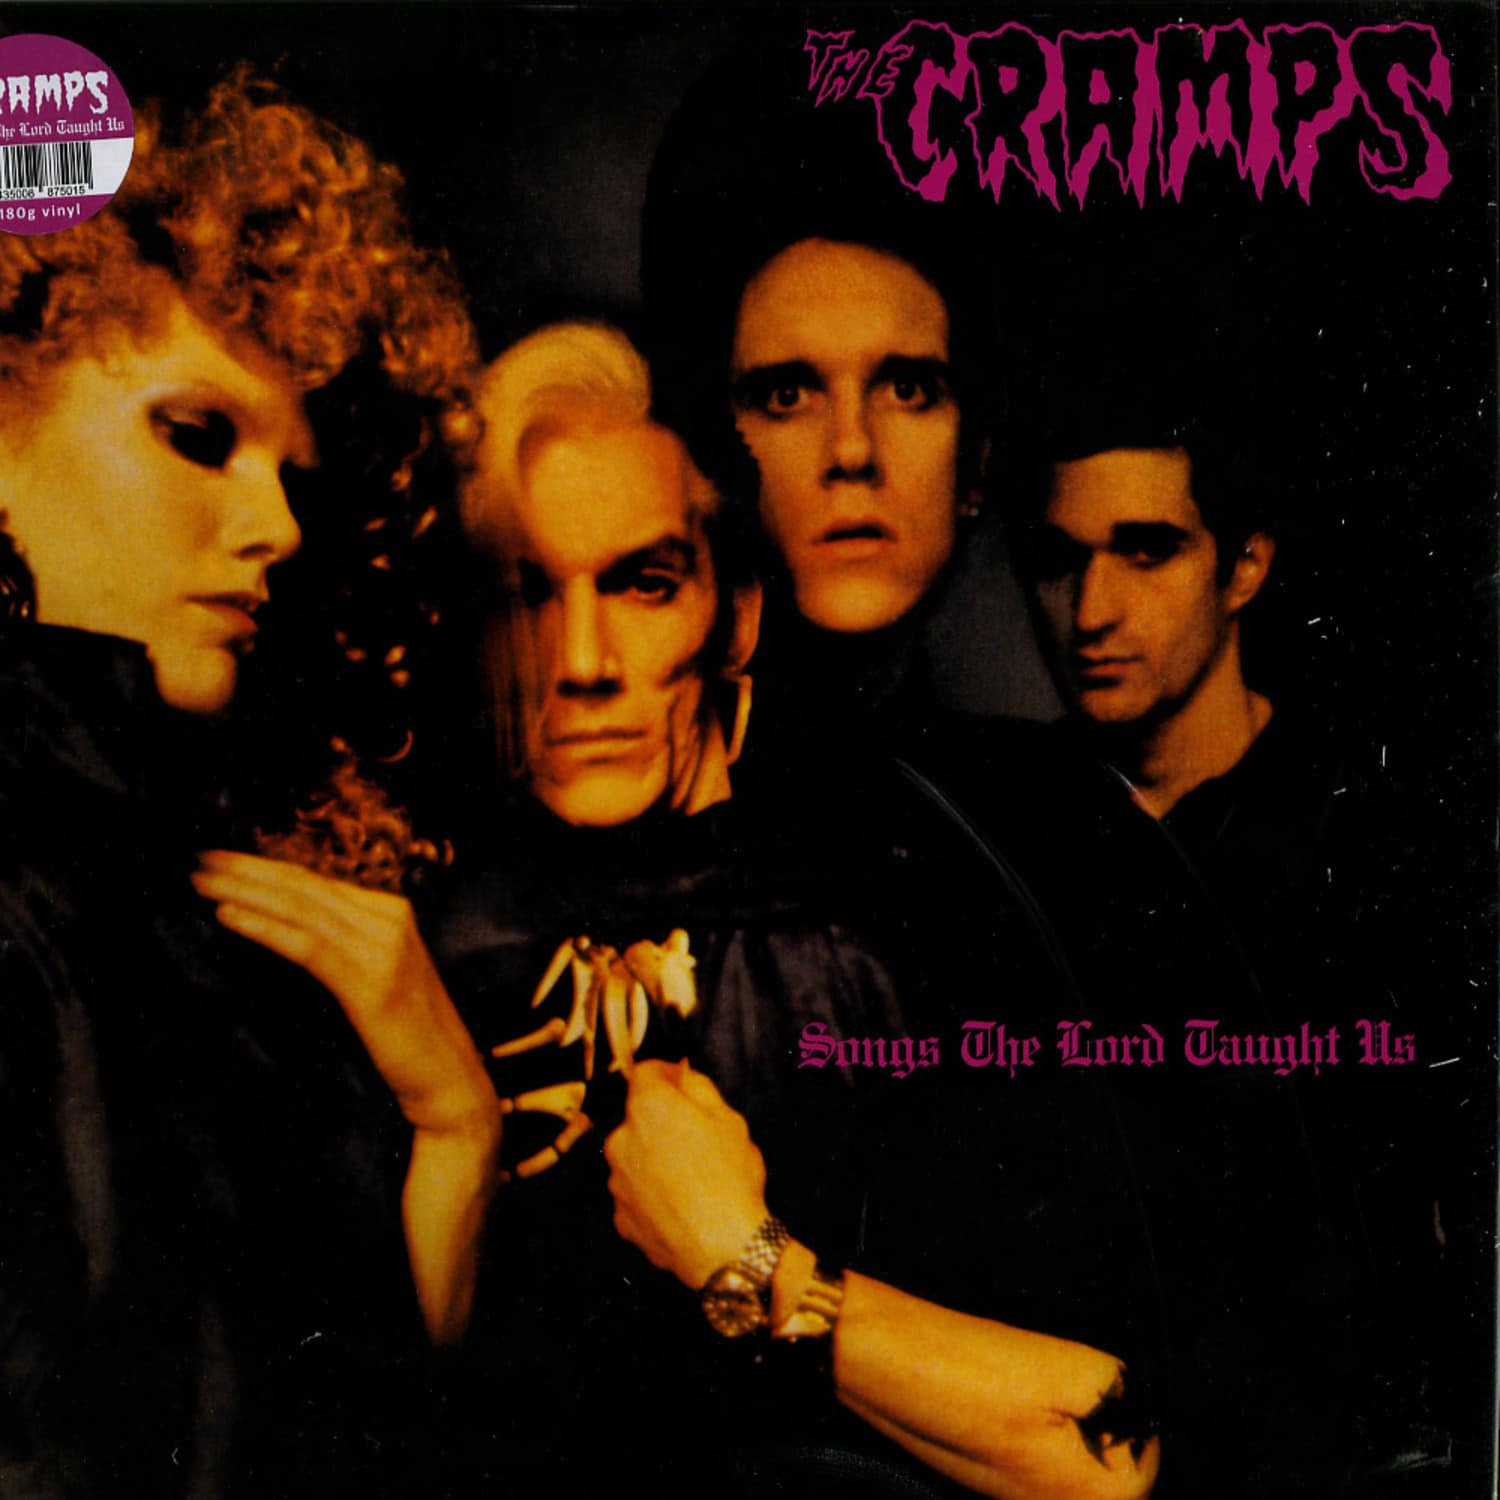 The Cramps - THE SONGS THE LORD LAUGHT US 